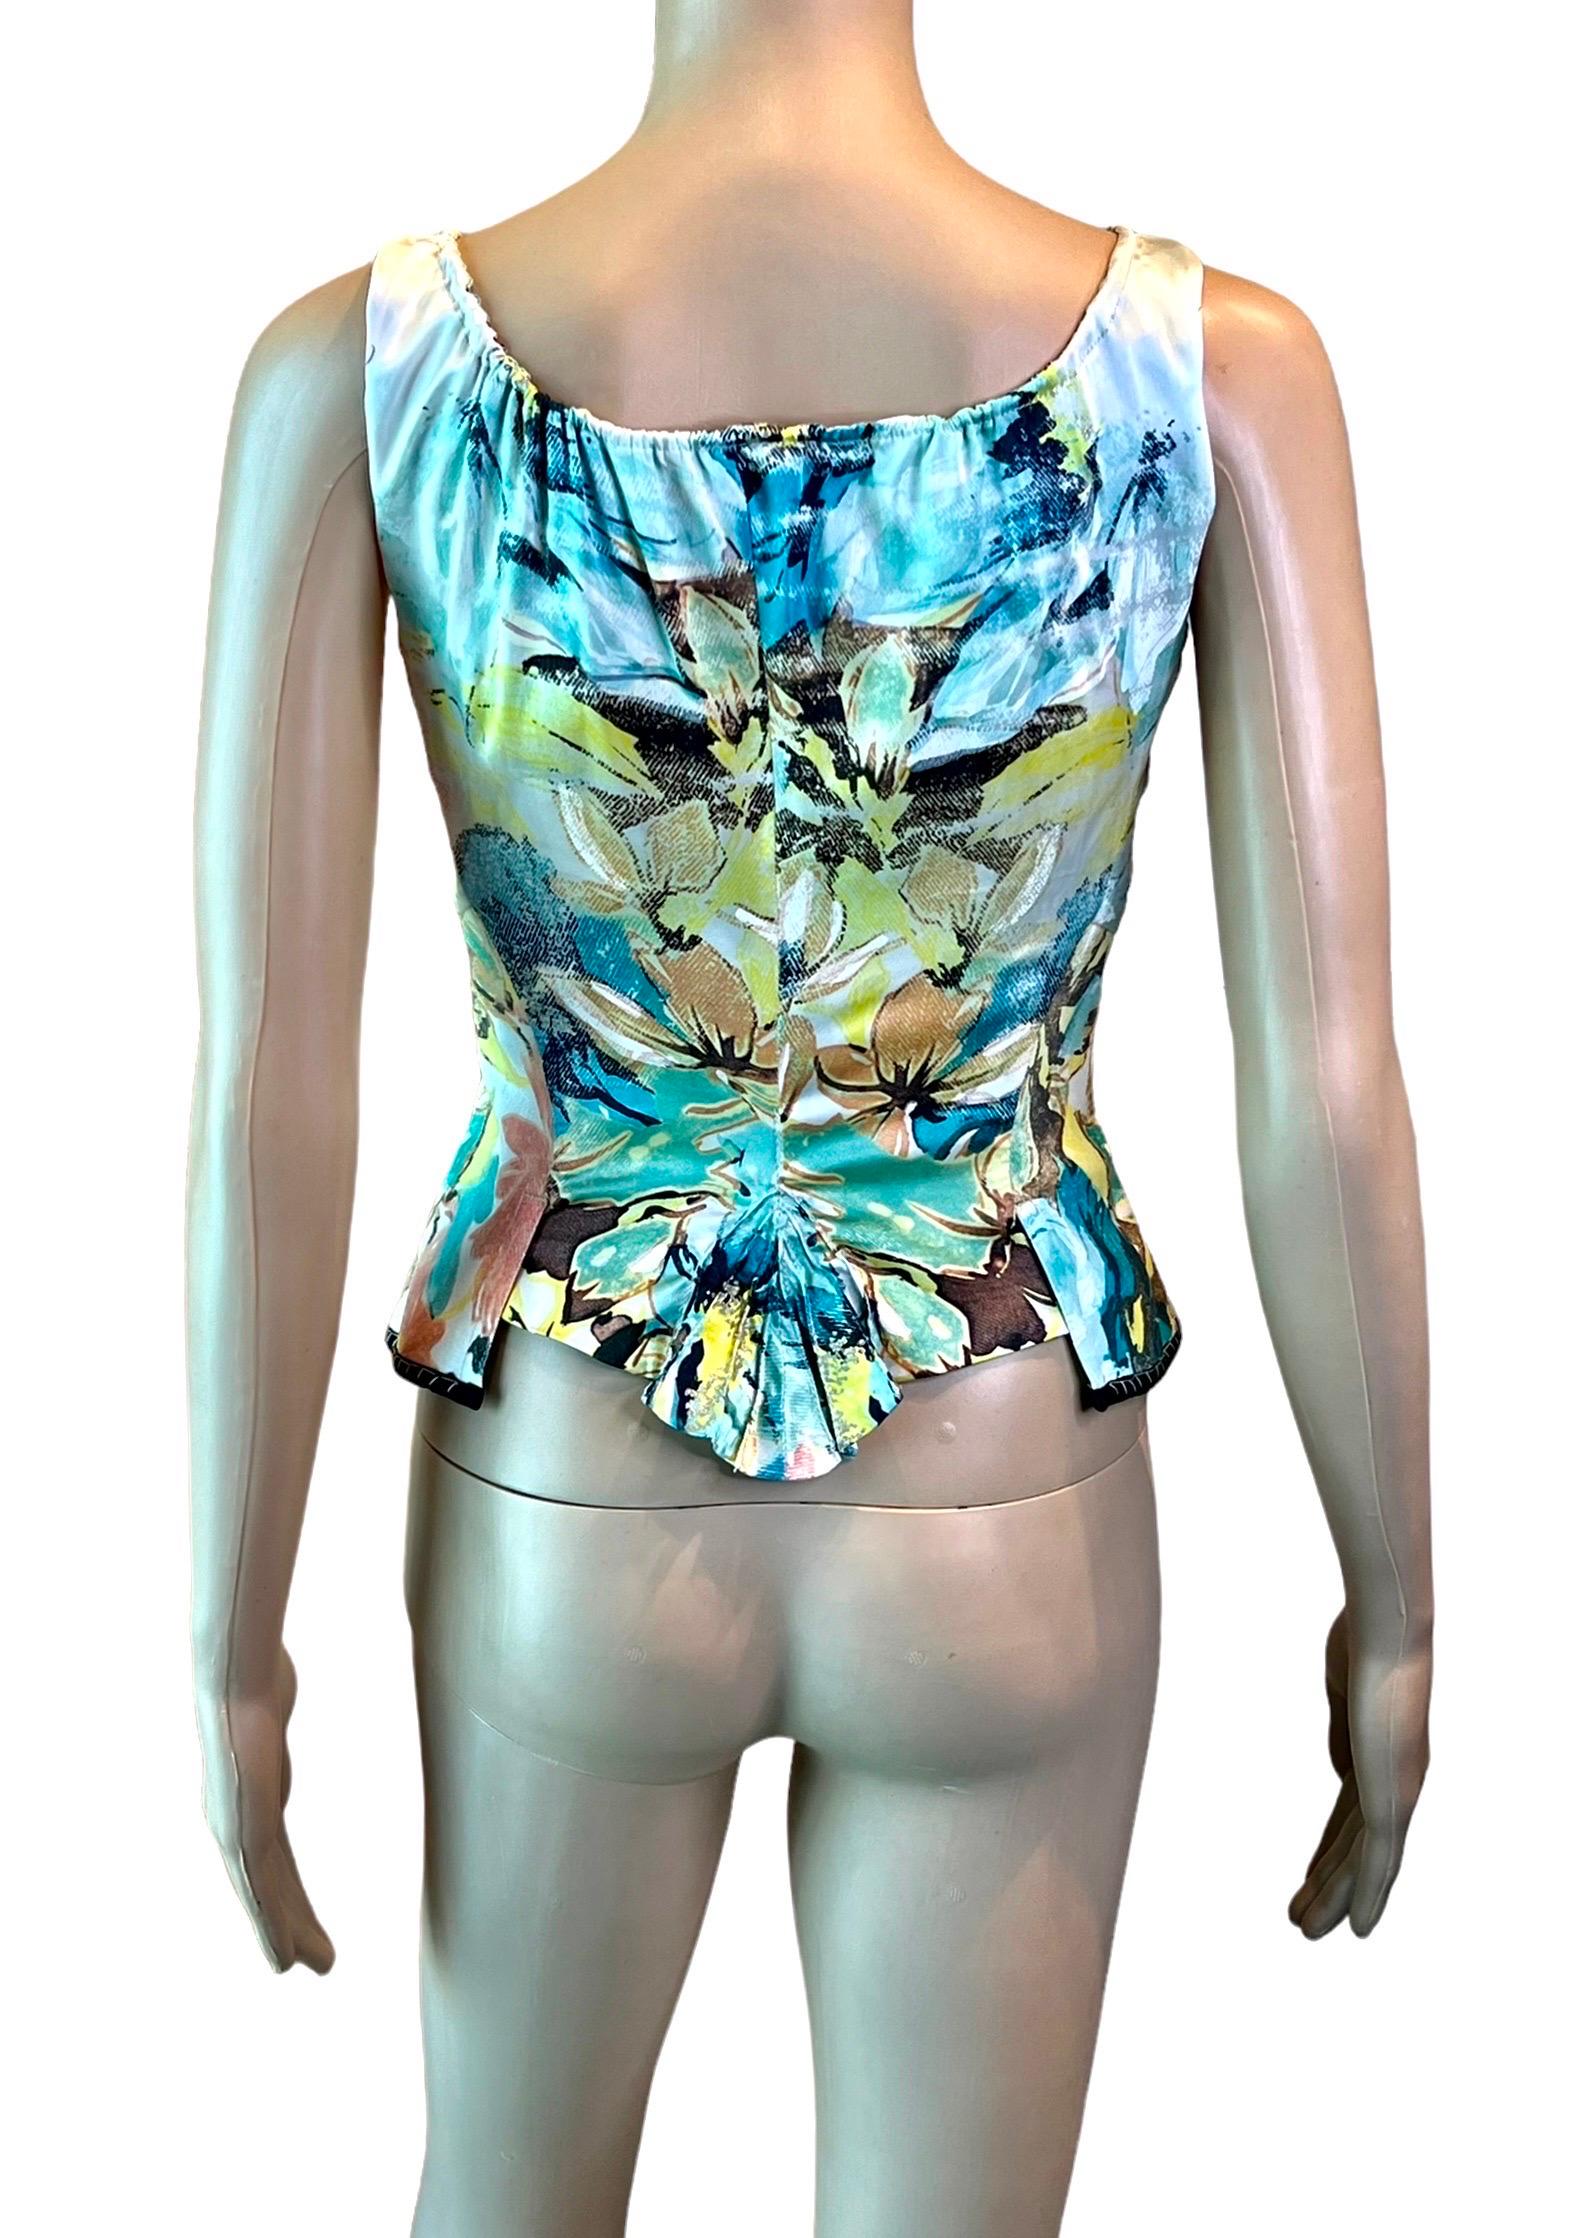 Roberto Cavalli S/S 2003 Bustier Corset Floral Abstract Print Denim Silk Top In Excellent Condition For Sale In Naples, FL